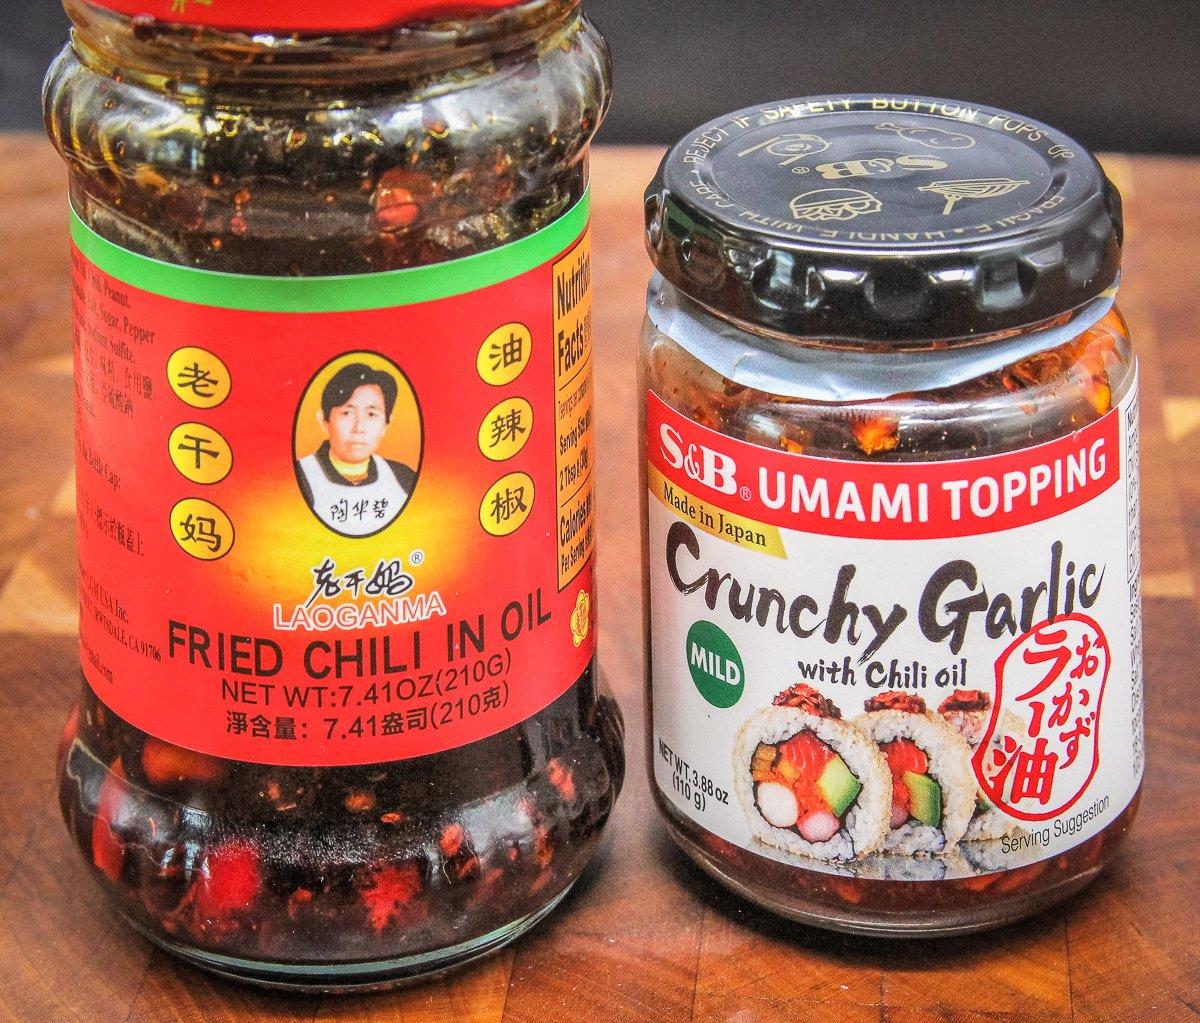 Chili flakes in oil and crispy garlic flakes are available at most Asian groceries or in large supermarkets.